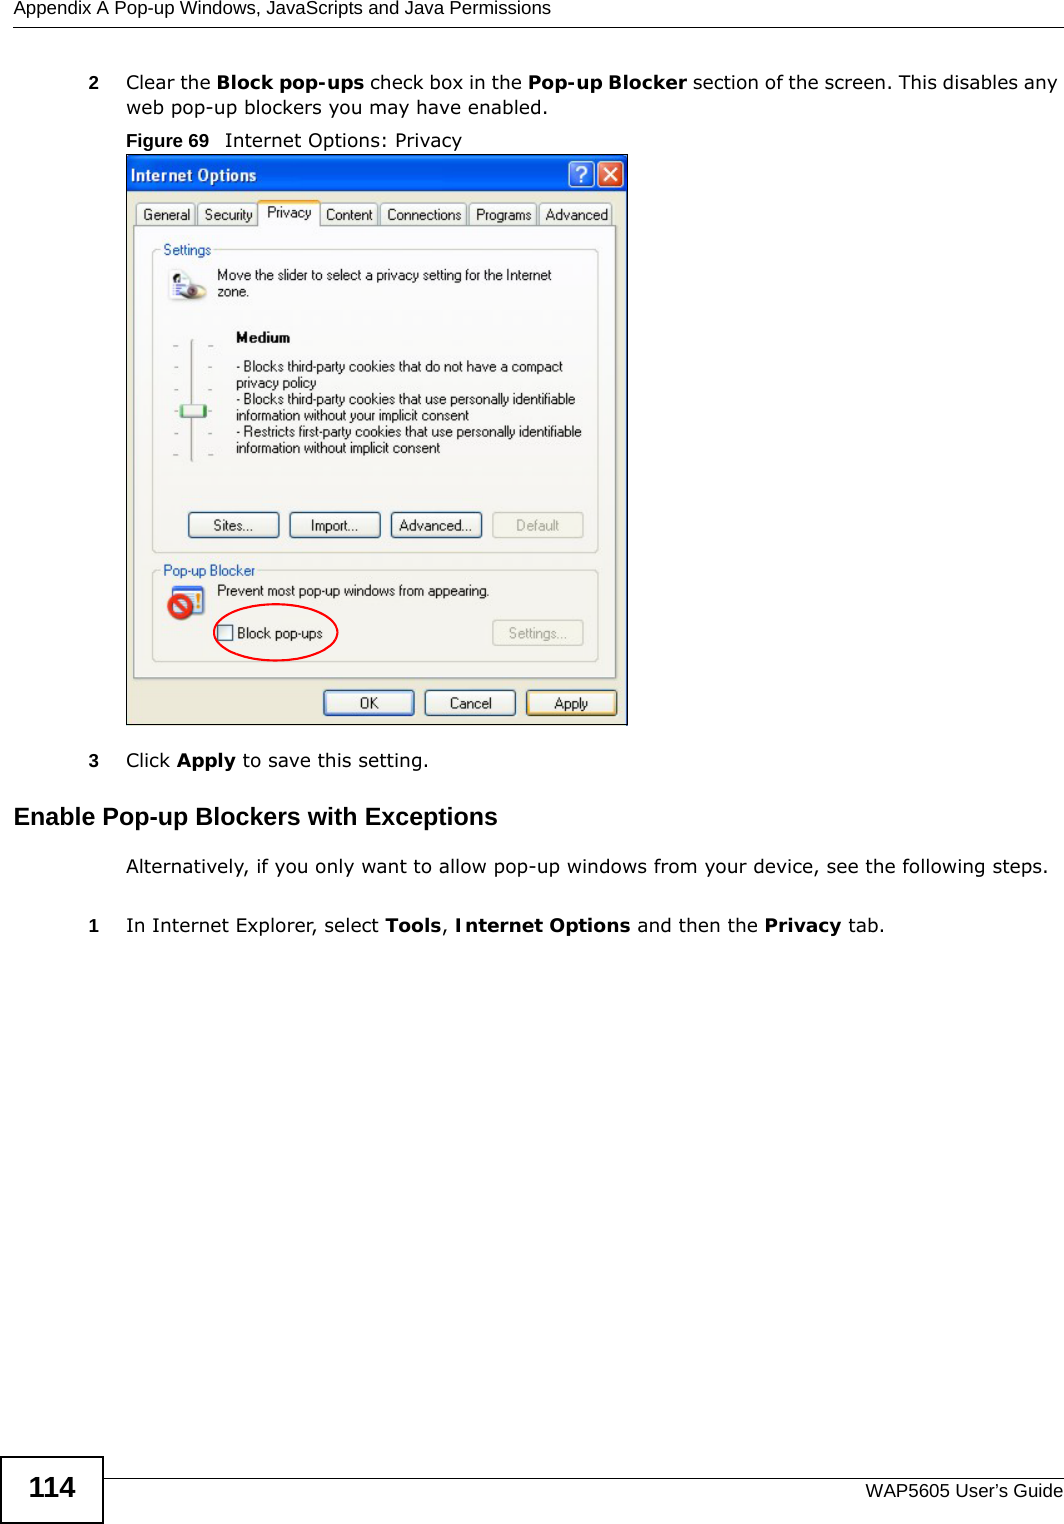 Appendix A Pop-up Windows, JavaScripts and Java PermissionsWAP5605 User’s Guide1142Clear the Block pop-ups check box in the Pop-up Blocker section of the screen. This disables any web pop-up blockers you may have enabled. Figure 69   Internet Options: Privacy3Click Apply to save this setting.Enable Pop-up Blockers with ExceptionsAlternatively, if you only want to allow pop-up windows from your device, see the following steps.1In Internet Explorer, select Tools, Internet Options and then the Privacy tab. 